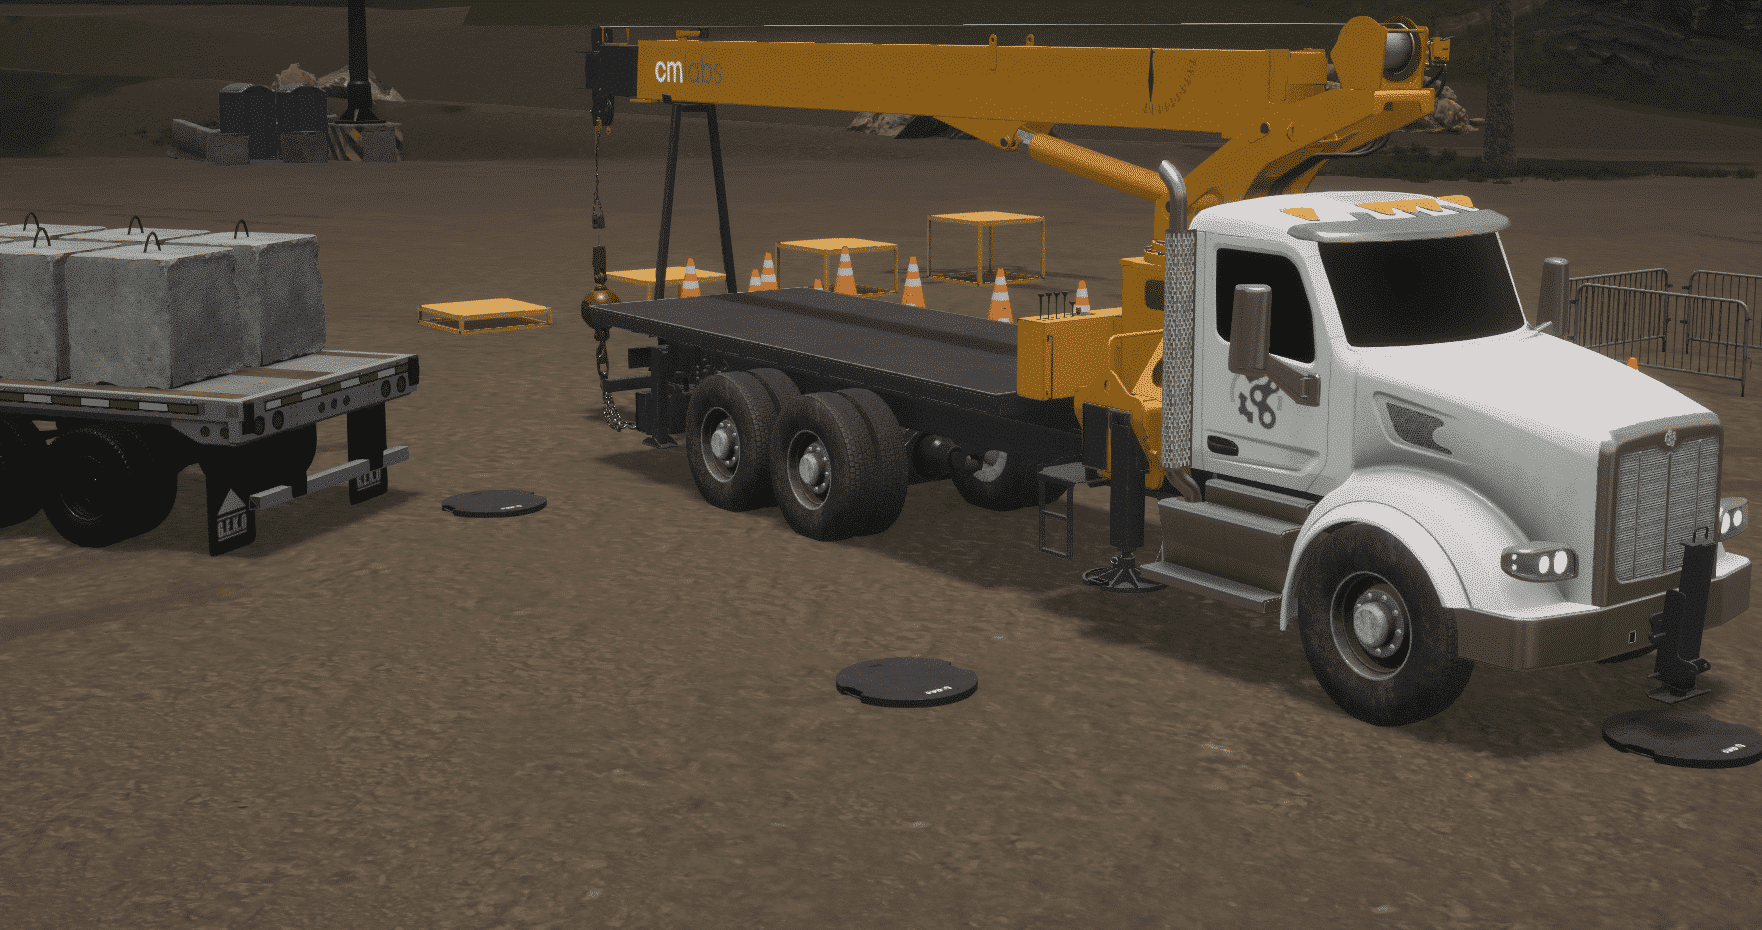 Boom Truck Simulator Training Pack - Beauty shot in an exercise